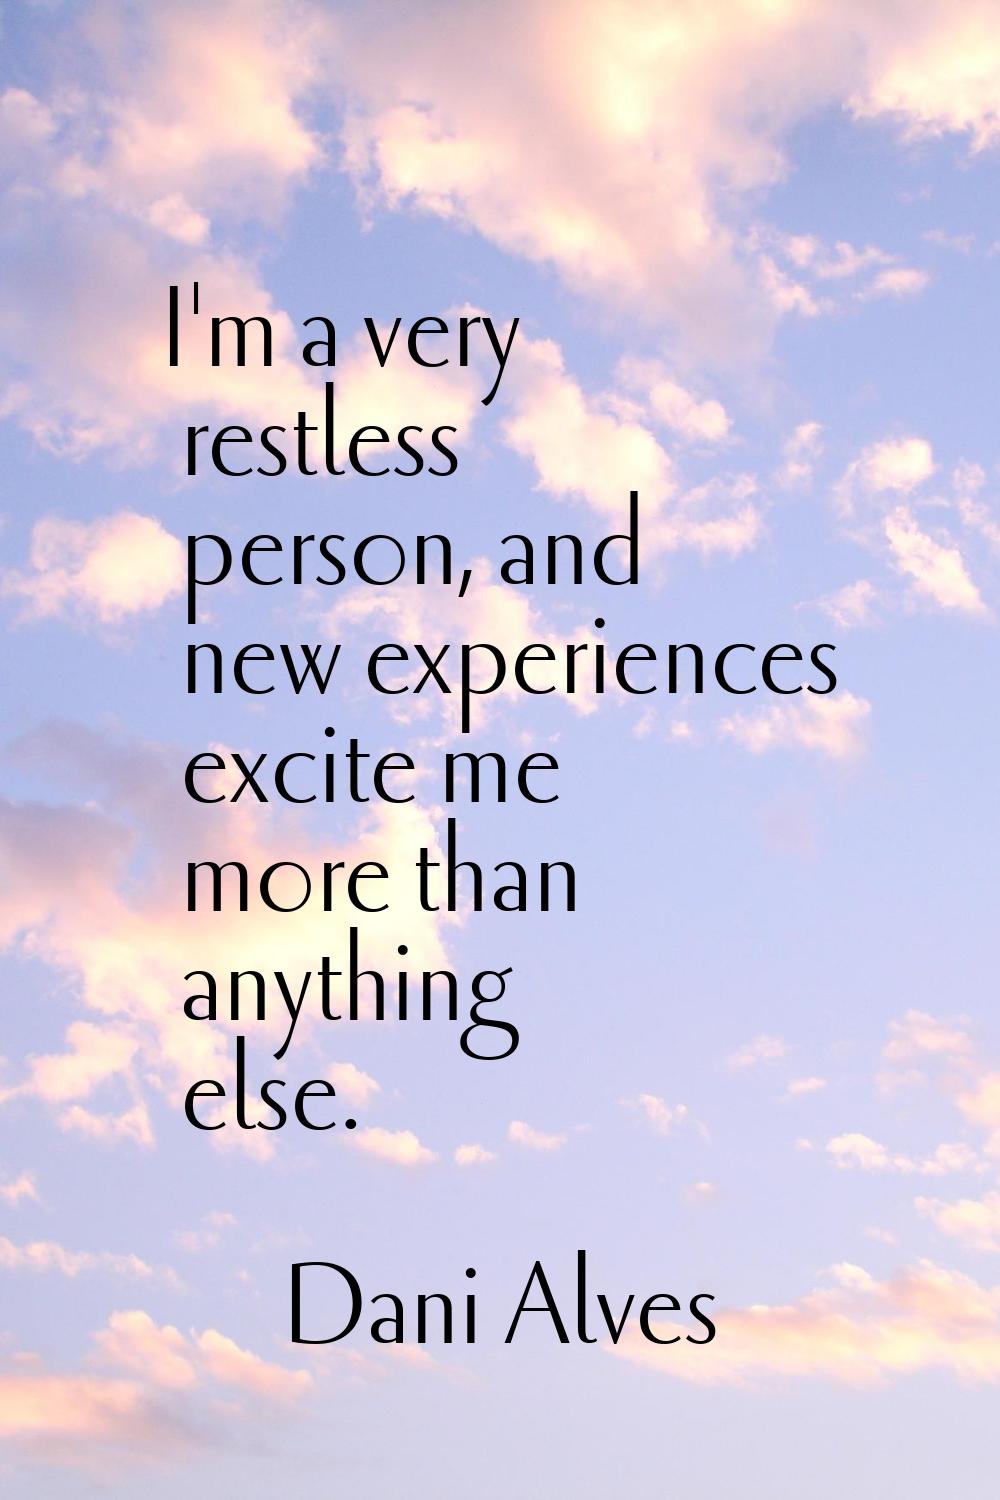 I'm a very restless person, and new experiences excite me more than anything else.